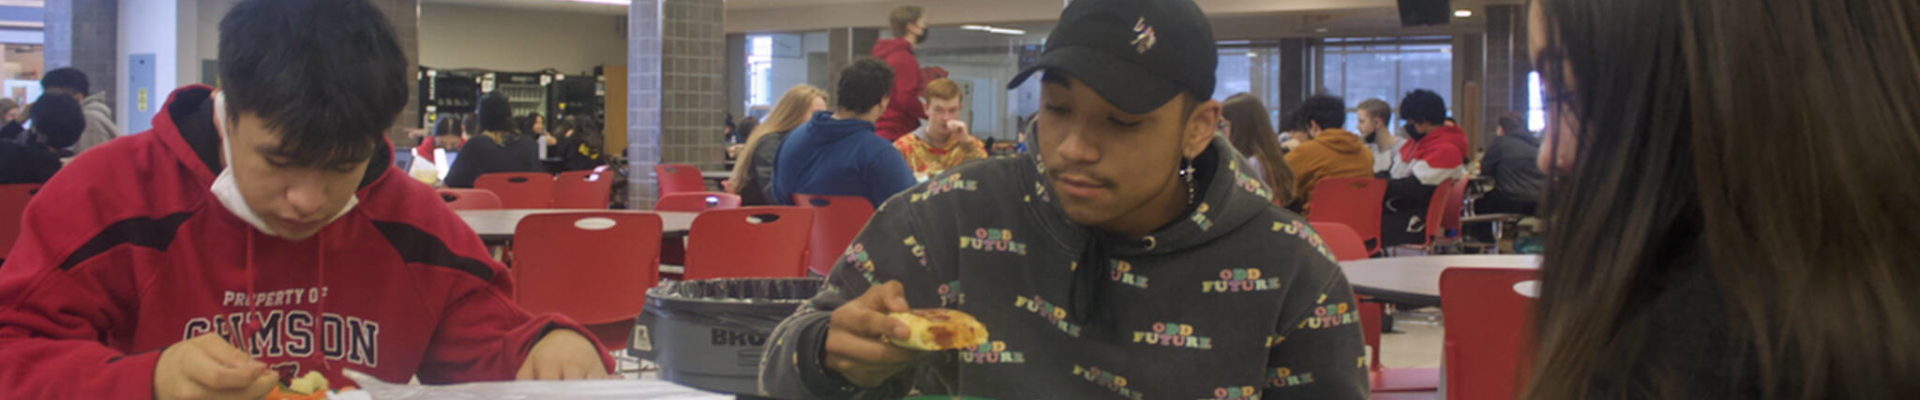 A.J. Wilson, 17, DeAndre Pittman, 16, and Elora Johnson, 16, eat lunch Thursday in the Juneau-Douglas High School: Yadaa.at Kalé cafeteria. They, like many students, agree the free meals available during the pandemic are worth continuing if funding can be found after it ends June 30, but they are likely to look off-campus for food if they are required to pay for school lunches again. (Mark Sabbatini / Juneau Empire)